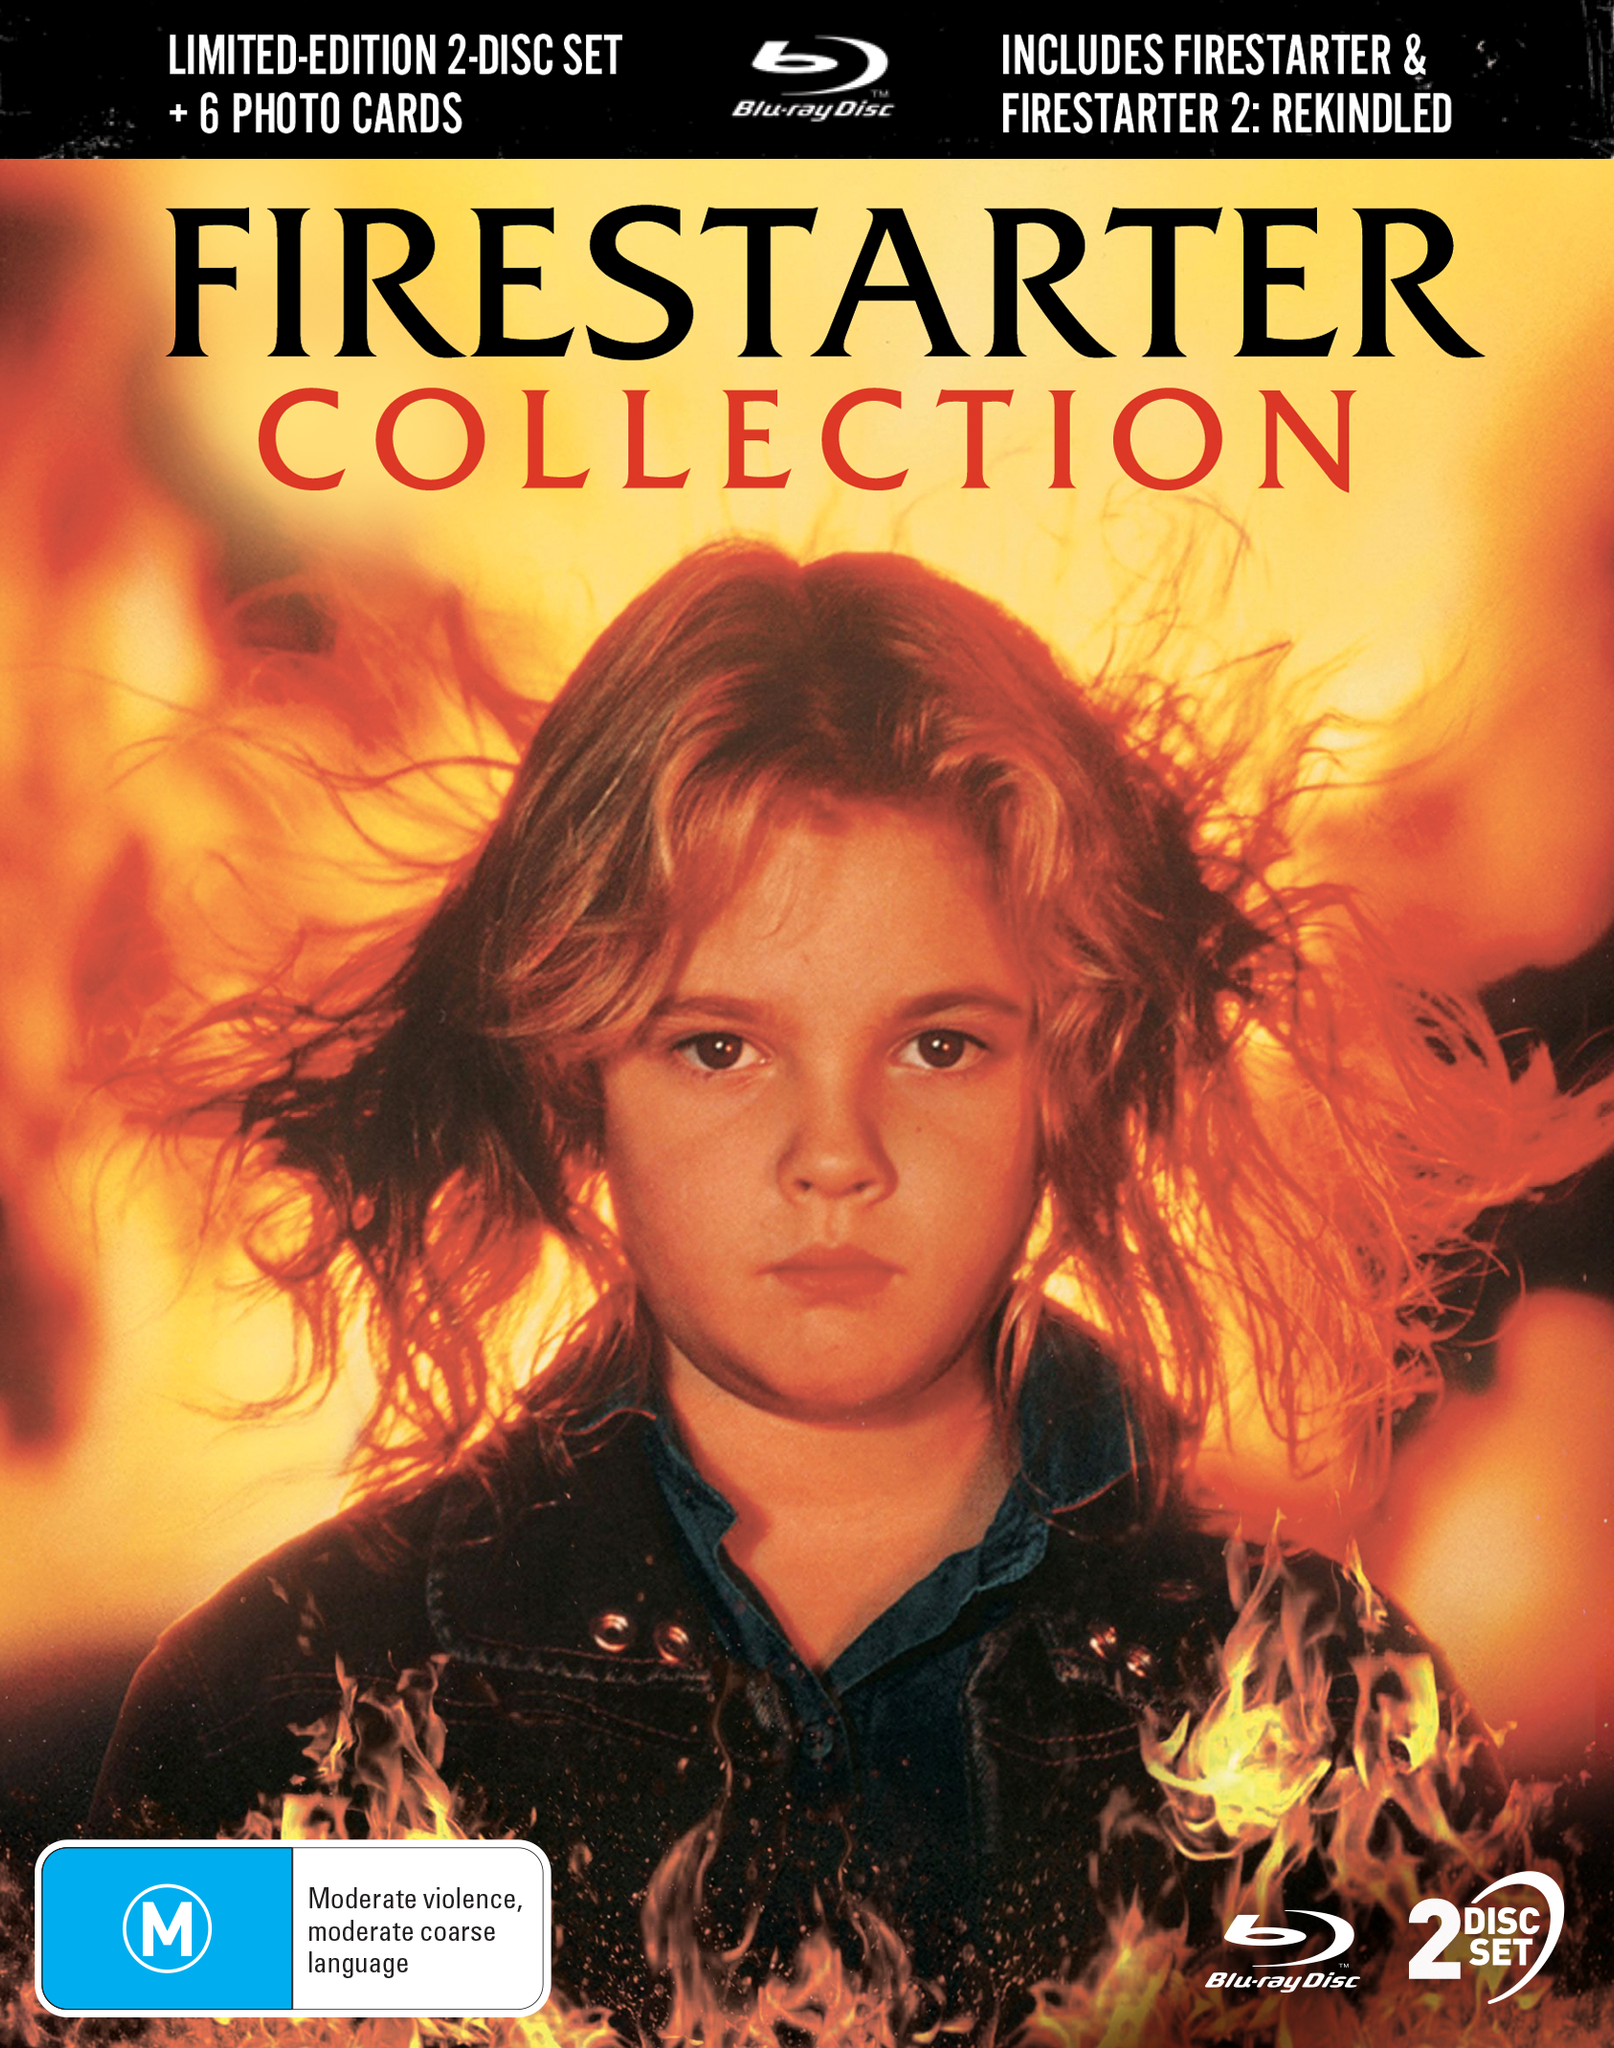 FIRESTARTER COLLECTION: FIRESTARTER (1984) /  FIRESTARTER 2: REKINDLED (2002) - LIMITED EDITION BLU-RAY (LENTICULAR HARDCOVER + PHOTO CARDS)